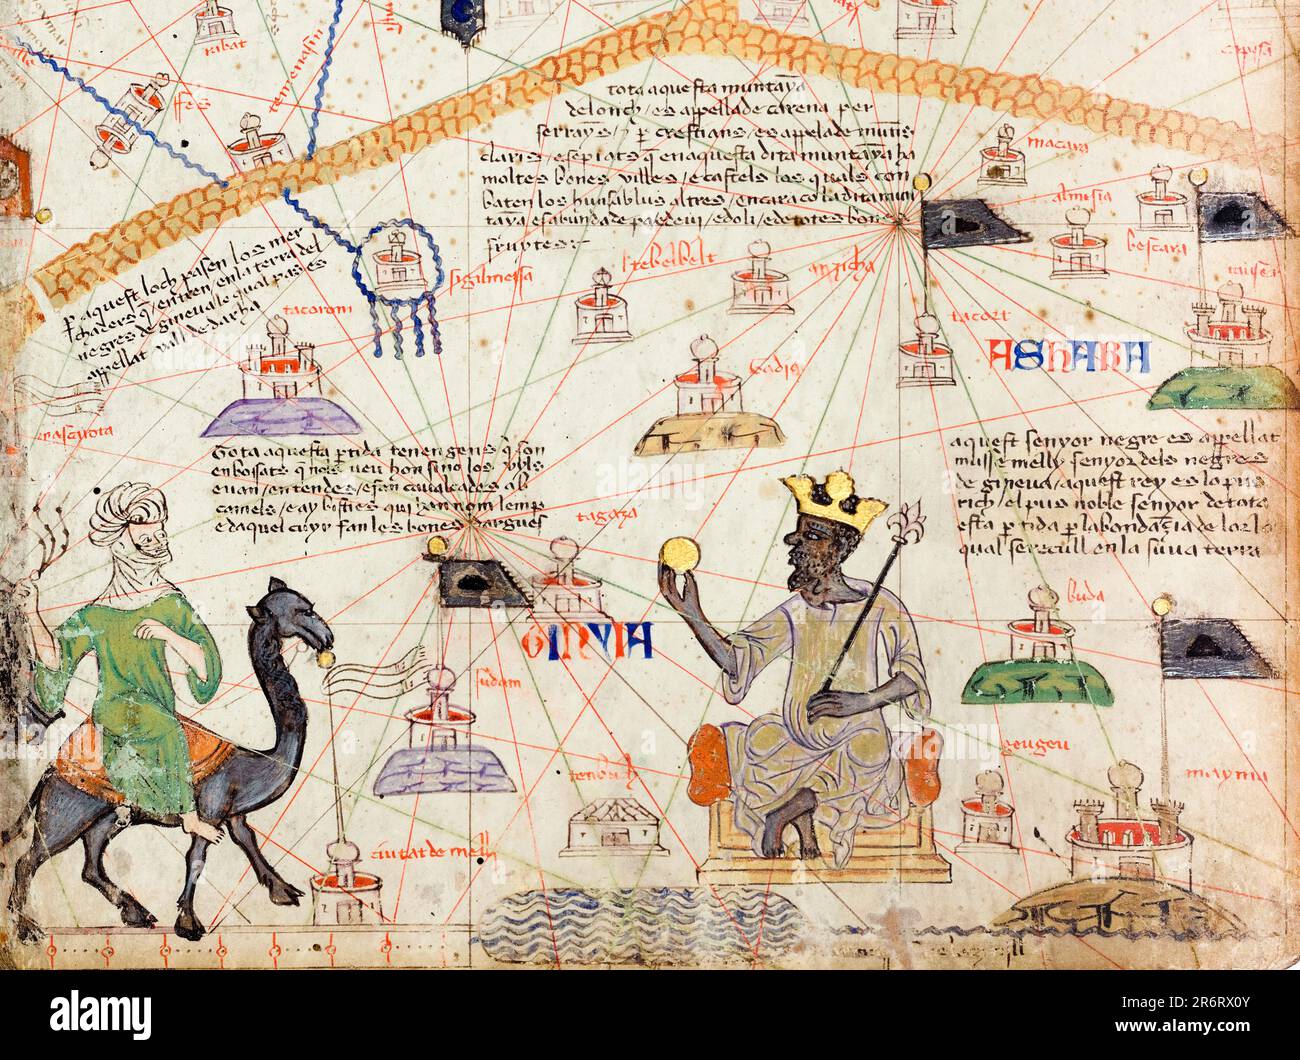 Detail from a Catalan Atlas showing a Map of the Western Sahara and Mansa Musa (1280-1337), ninth ruler of the Mali Empire (circa 1312-1337), map by Abraham Cresques, 1375 Stock Photo